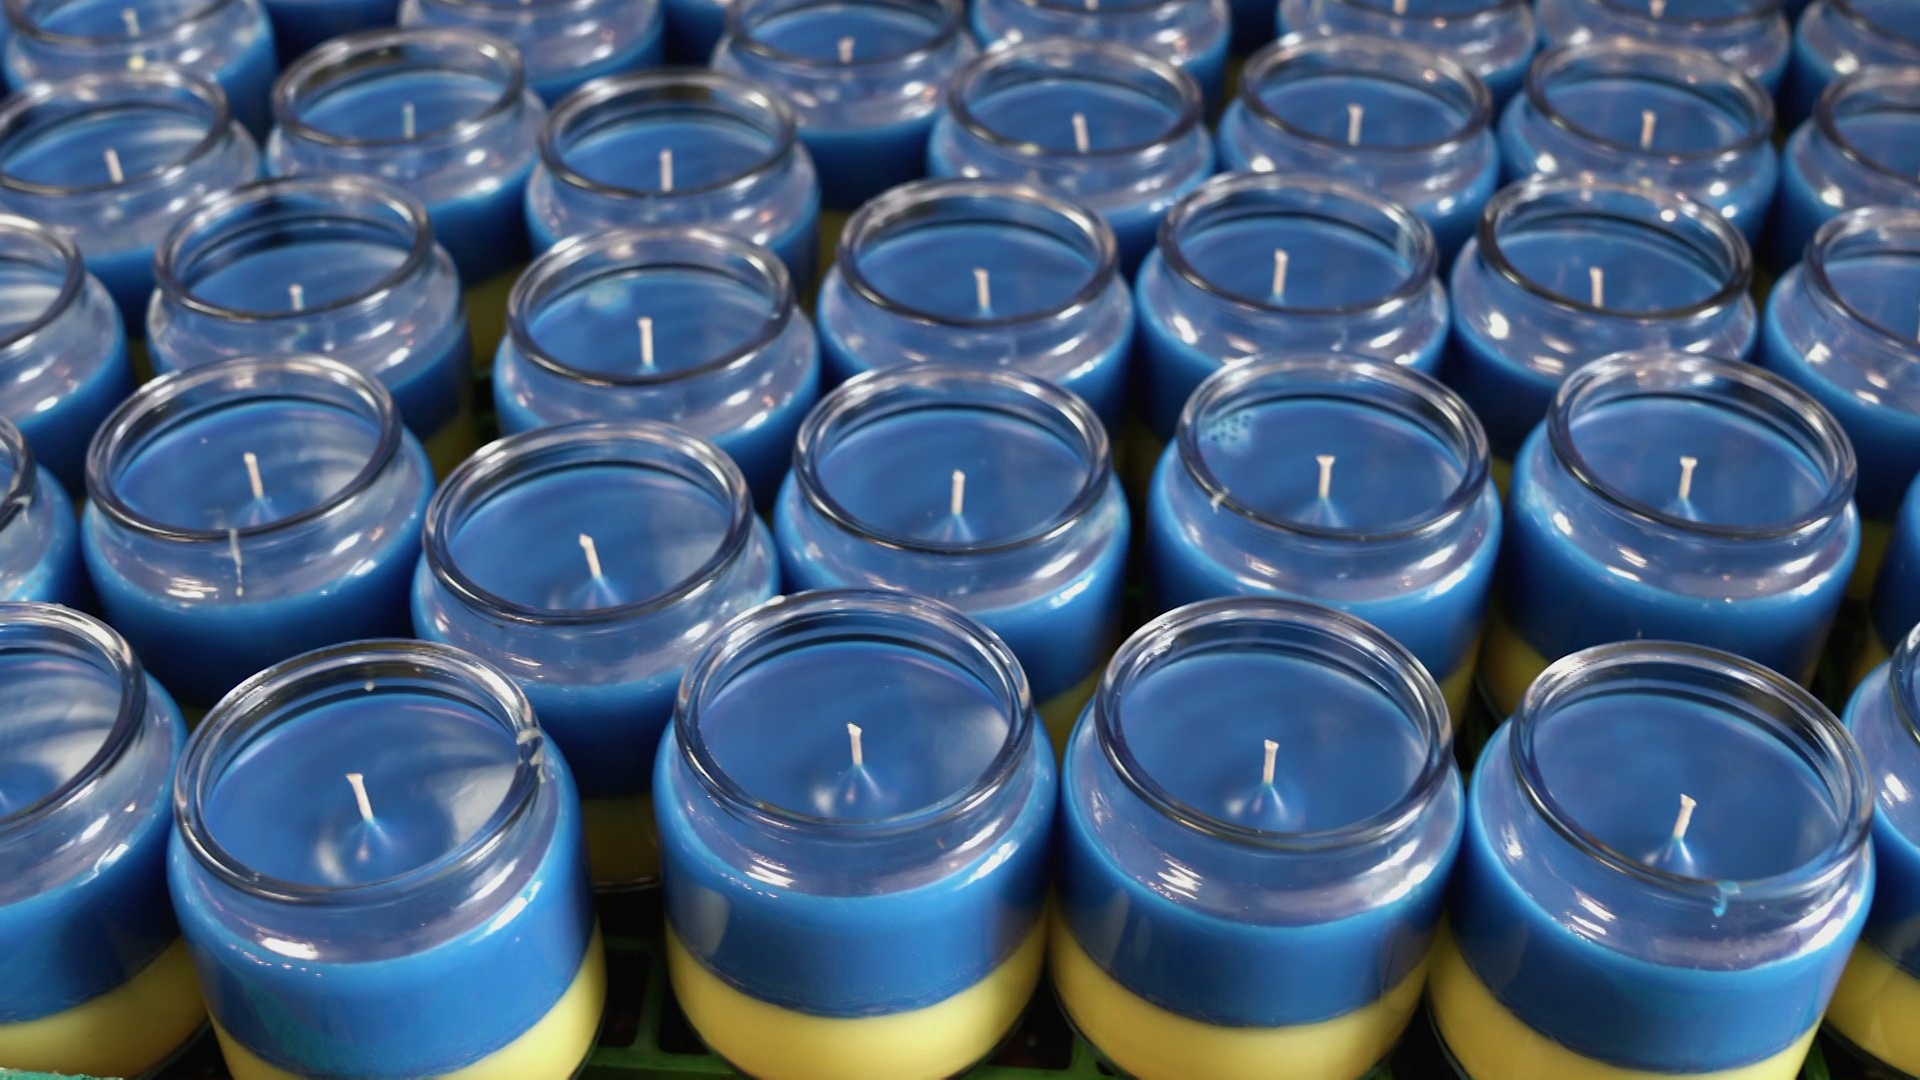 Several blue and yellow candles are arranged as part of a fundraiser